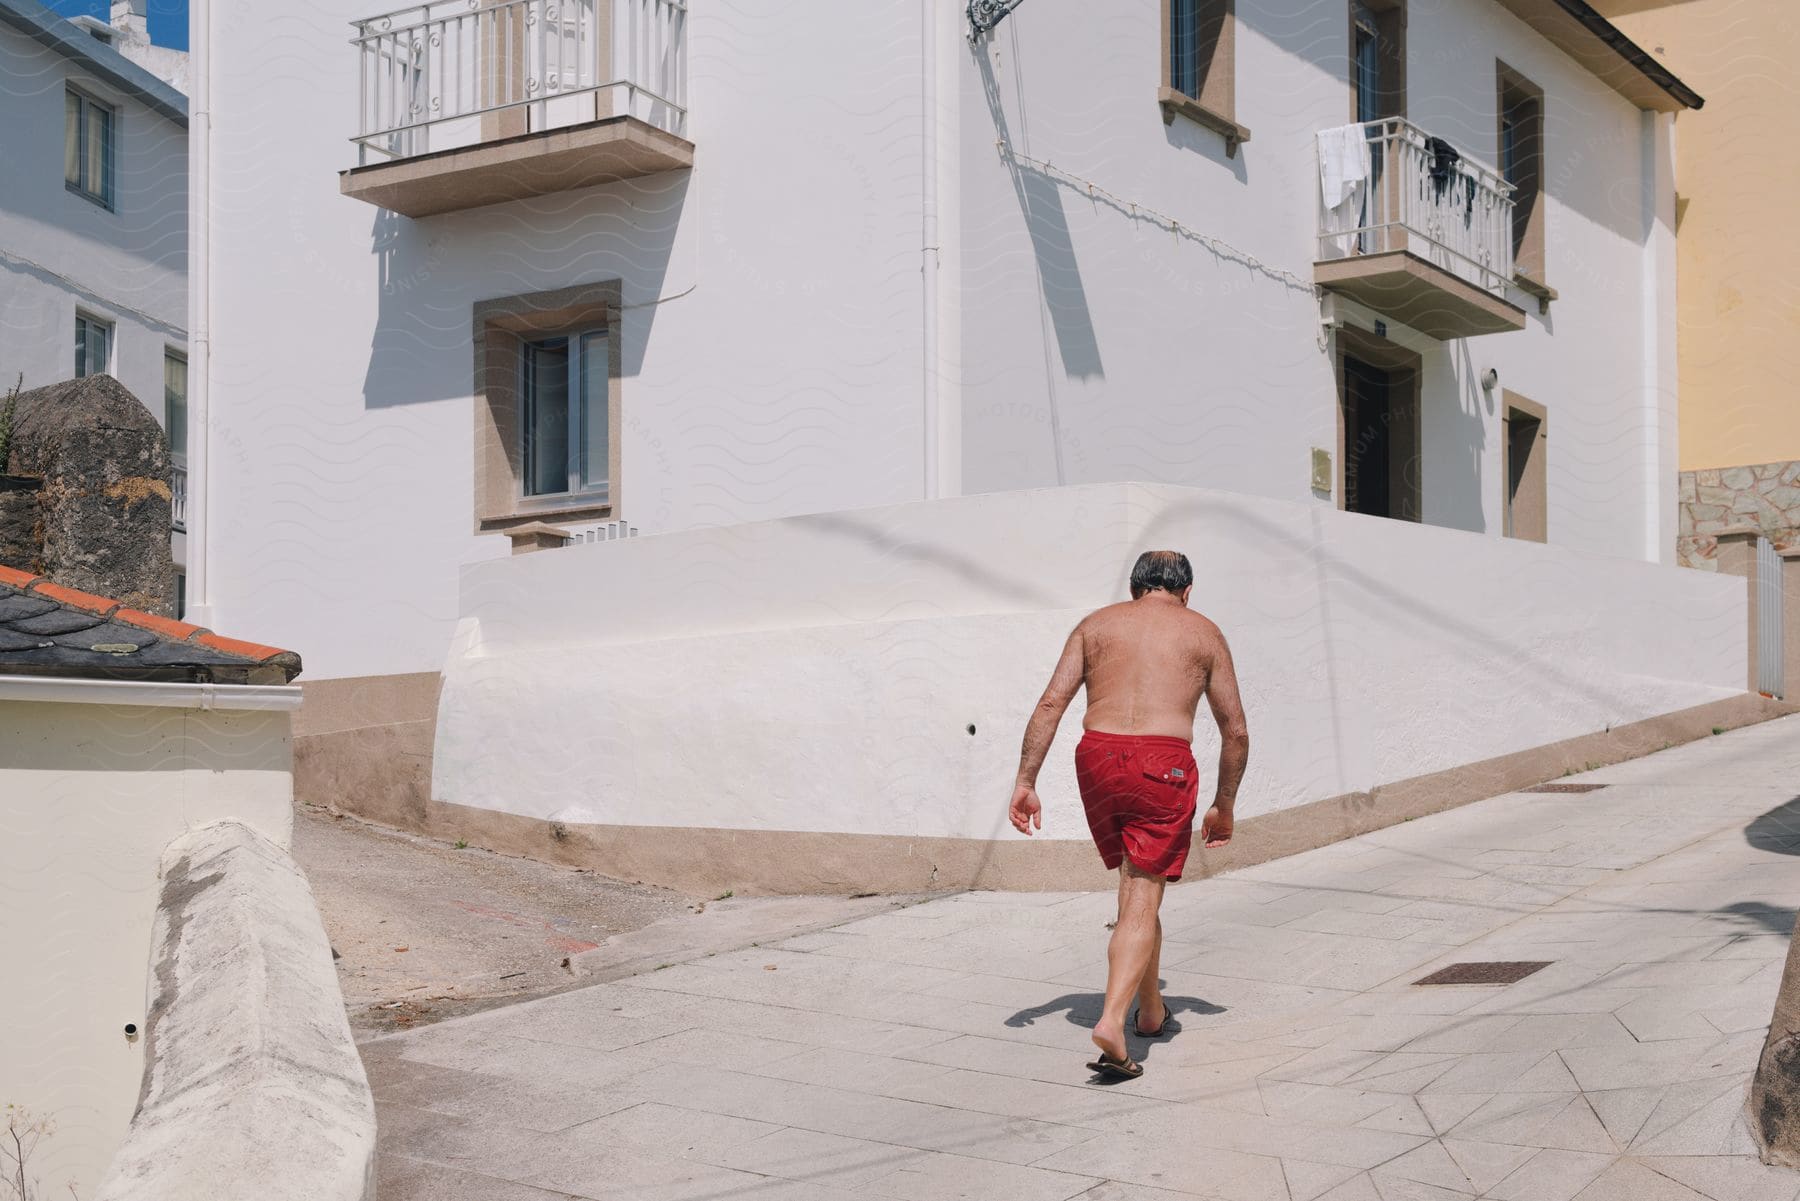 Man without a t-shirt and in red shorts walking through a residential neighborhood